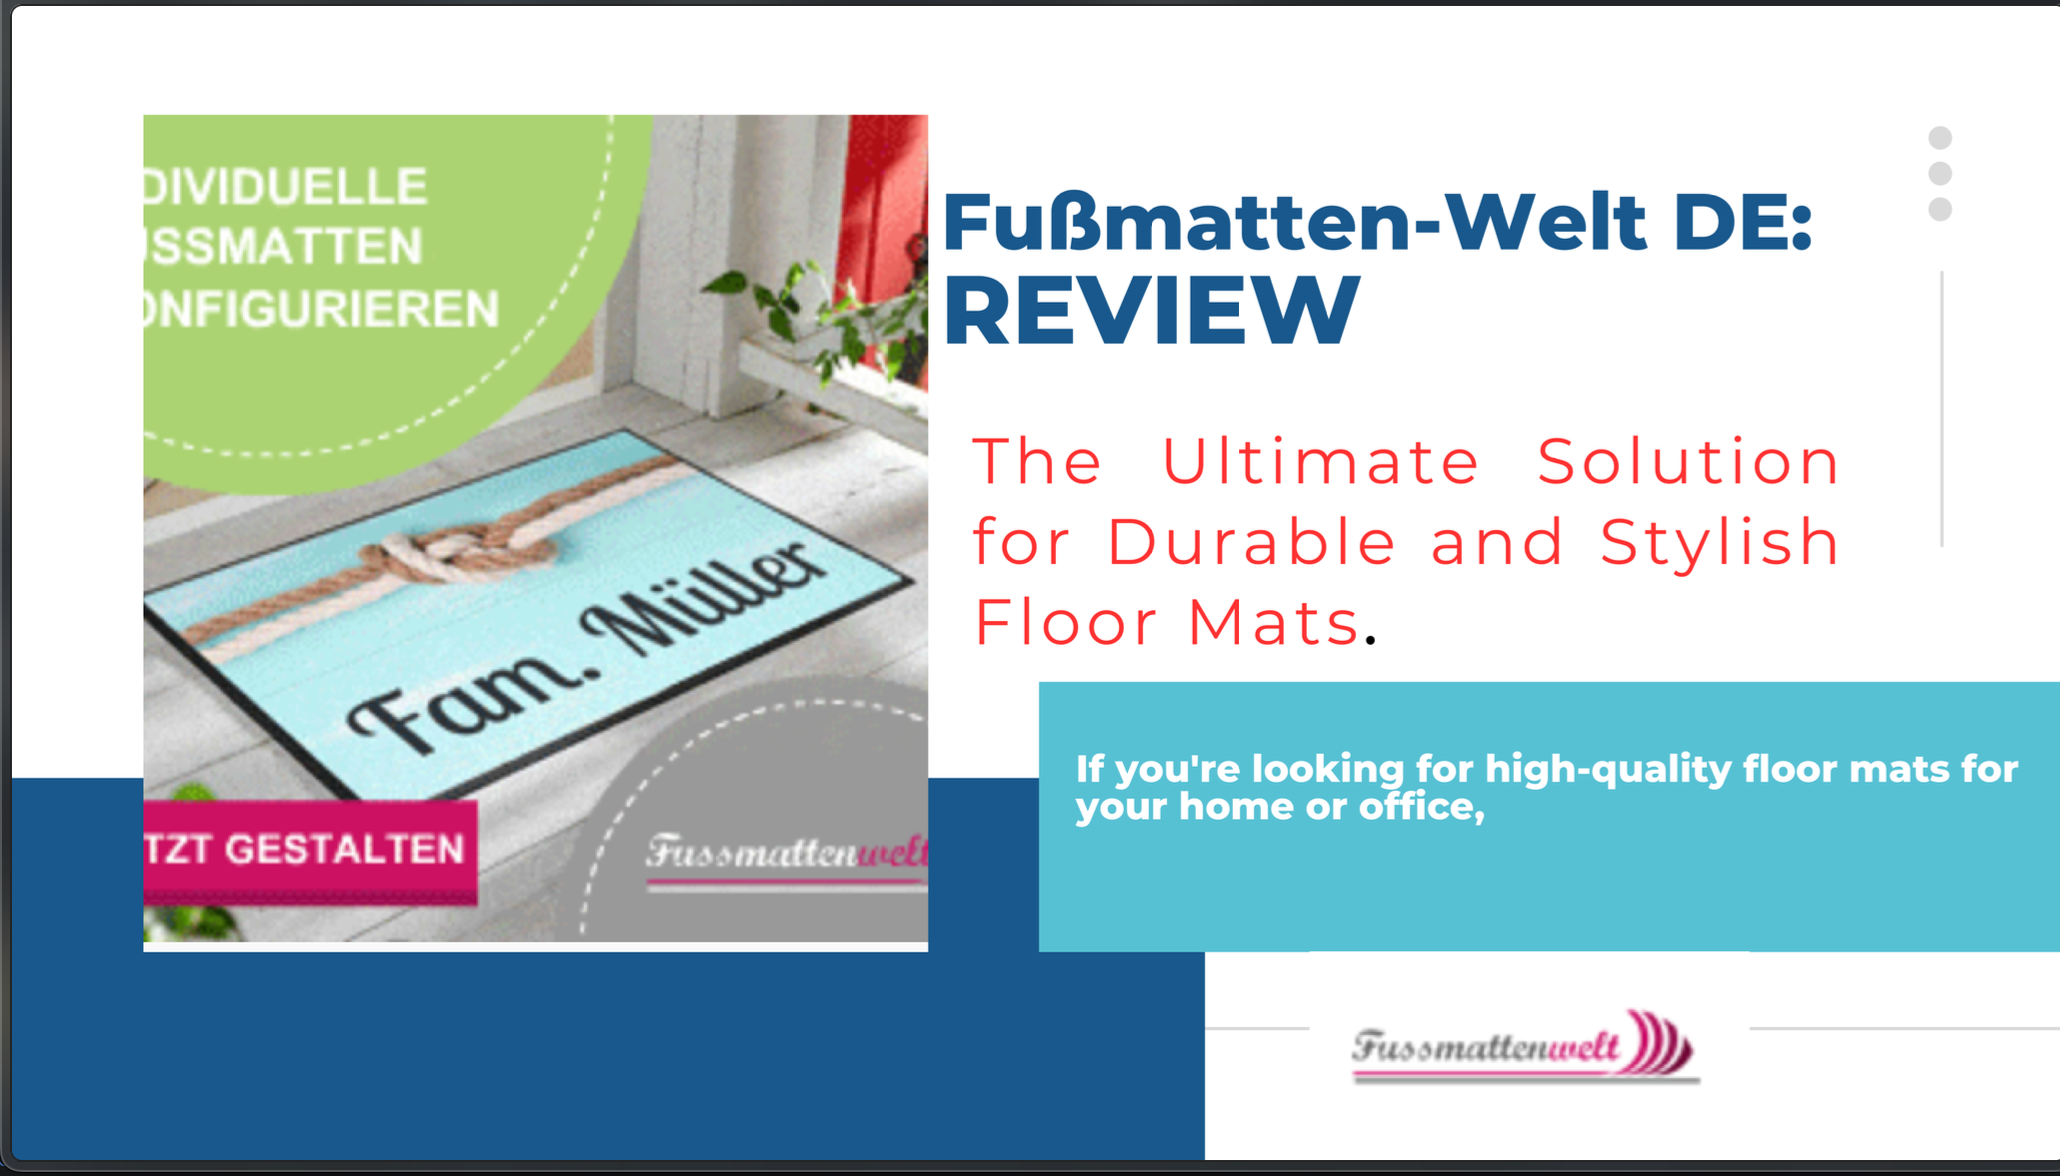 Fußmatten-Welt DE: The Ultimate Solution for Durable and Stylish Floor Mats